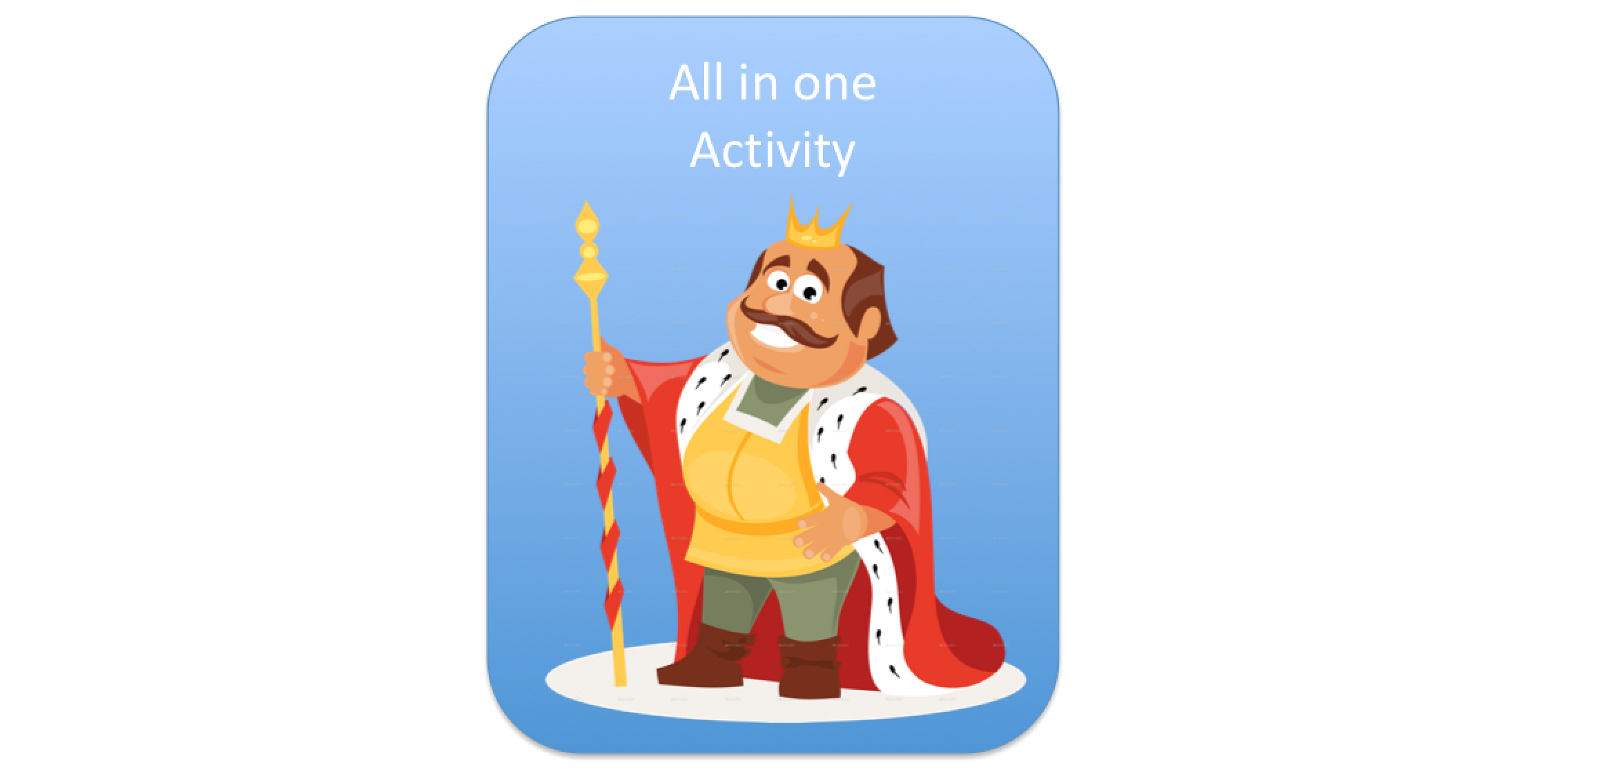 1-All-in-one-Activity